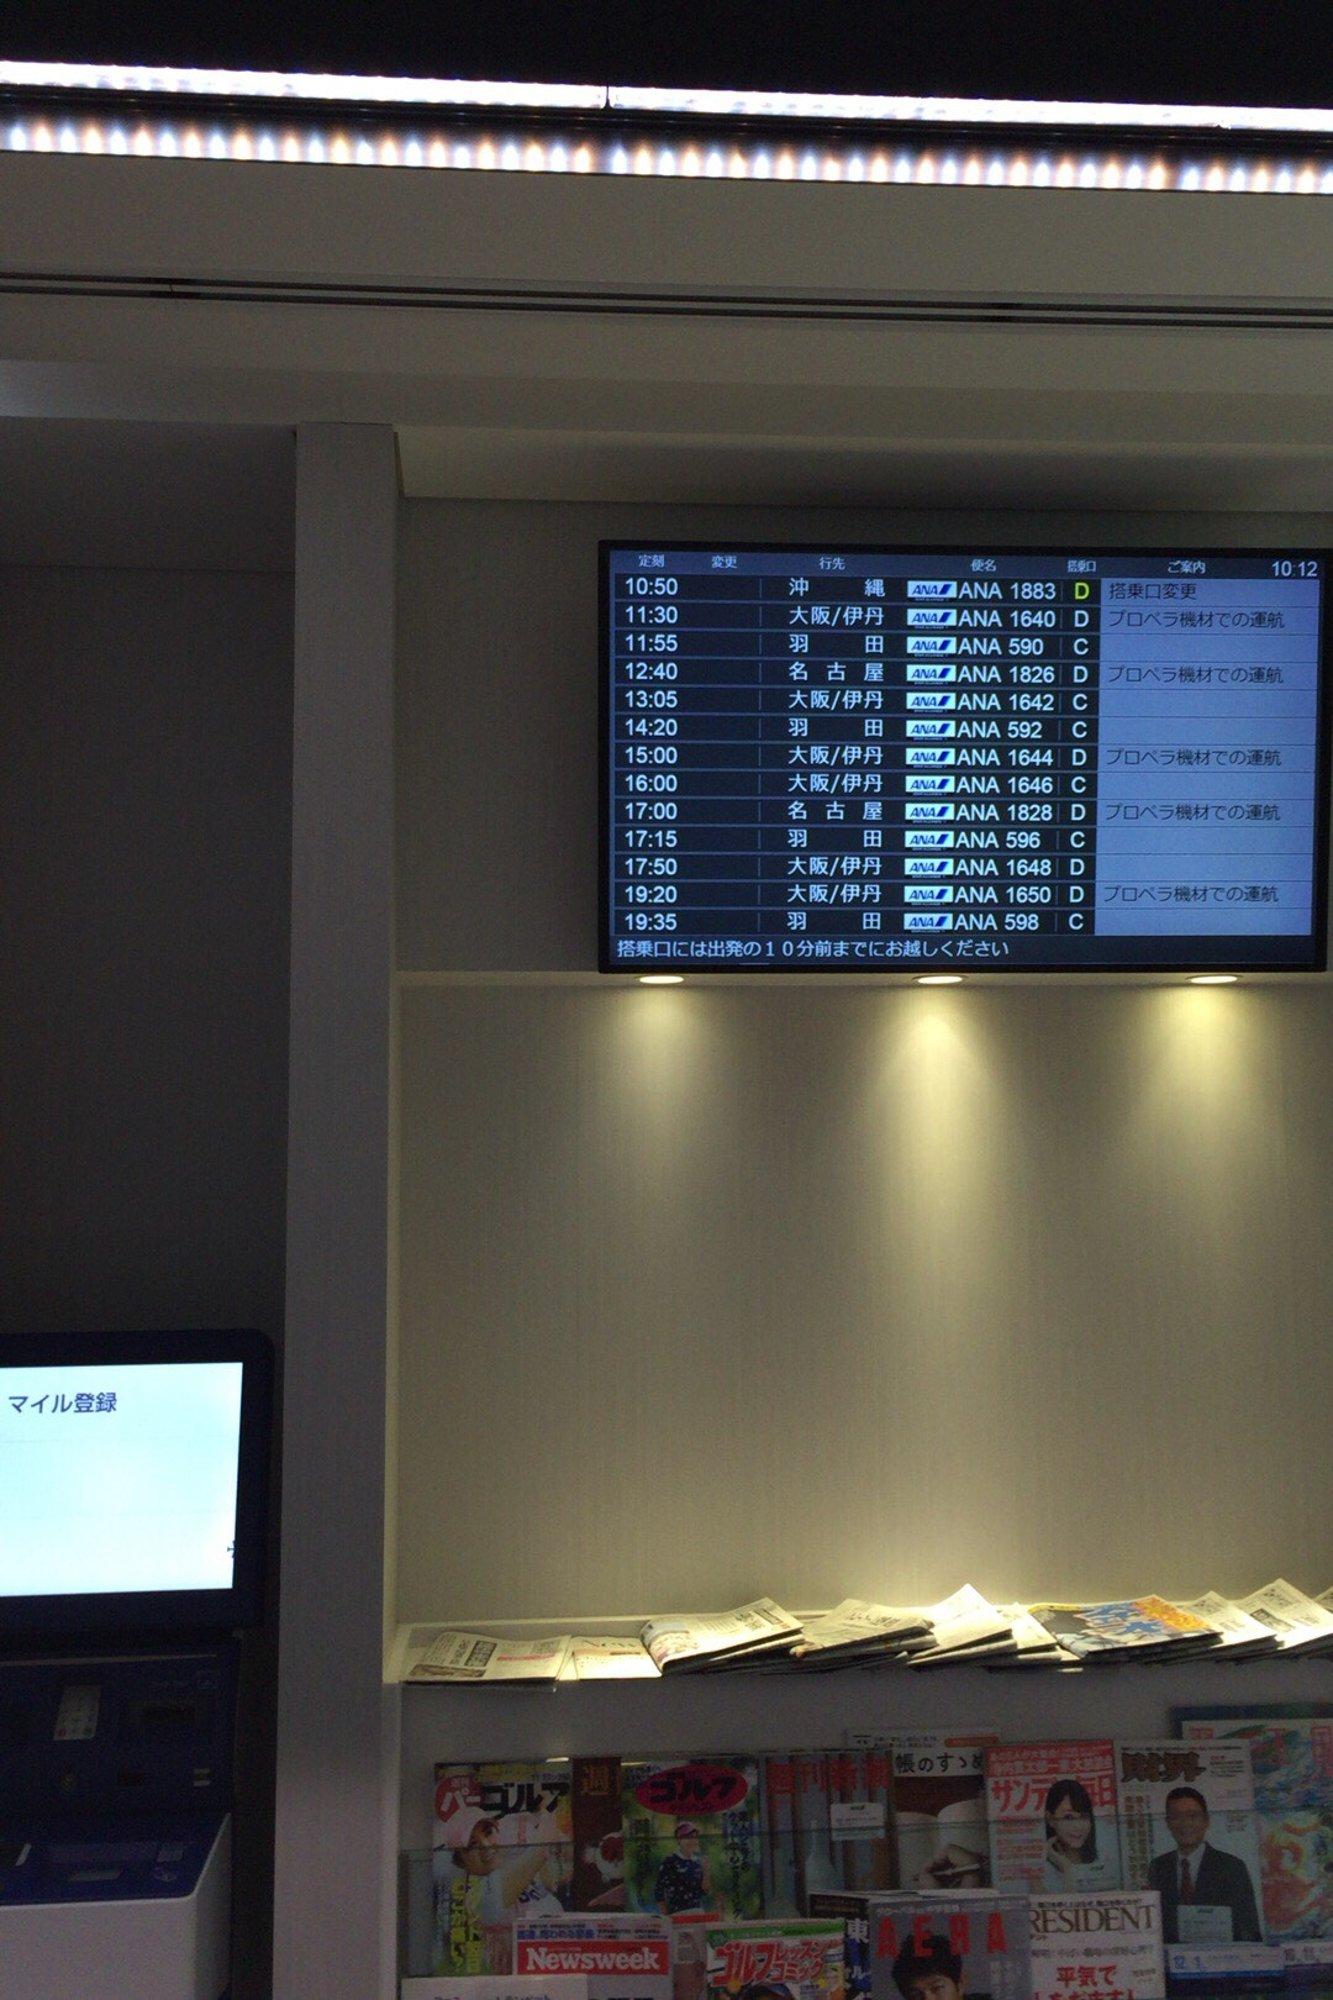 All Nippon Airways ANA Lounge image 1 of 9